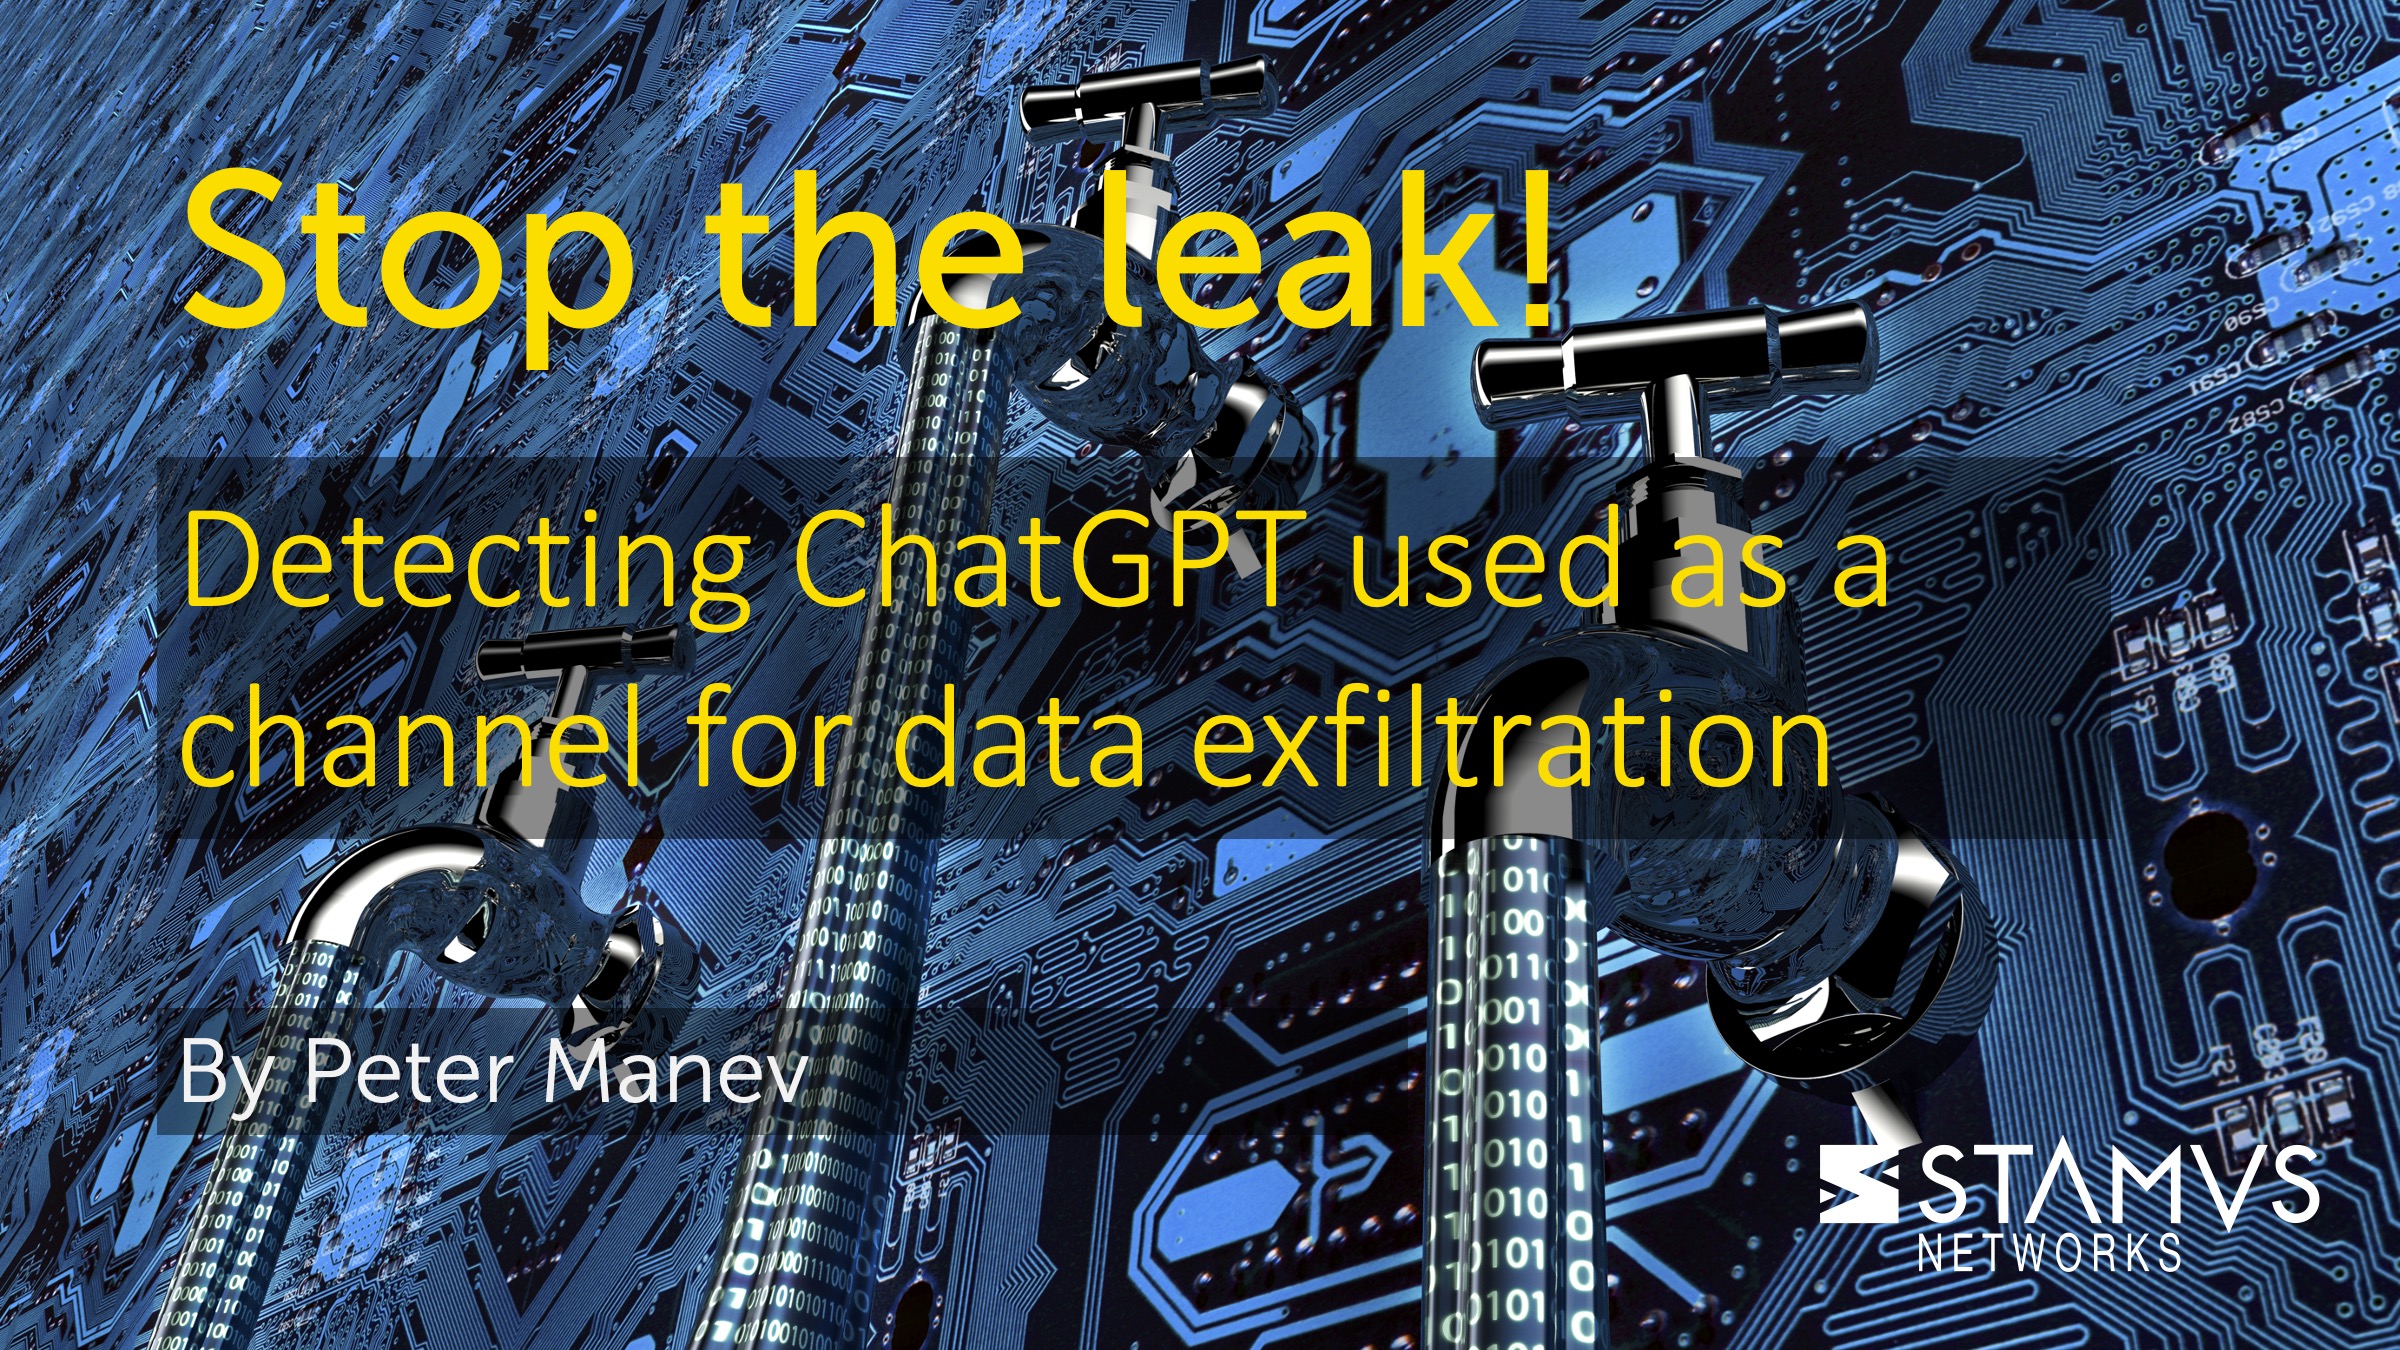 Stop the leak! Detecting ChatGPT used as a channel for data exfiltration by Peter Manev